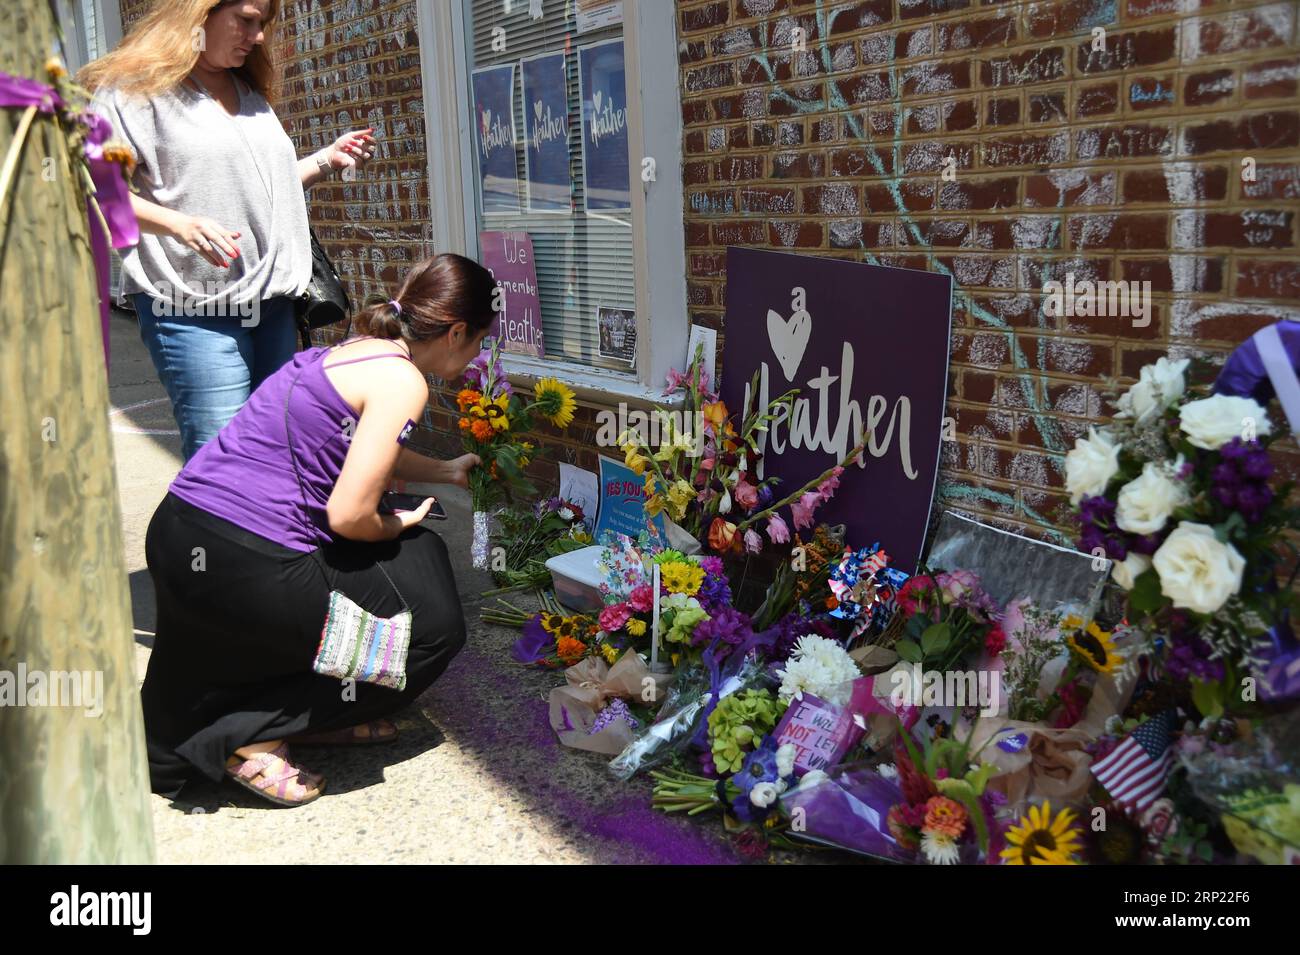 (180812) -- WASHINGTON, Aug. 12, 2018 -- People pay condolences to Heather Heyer at the street corner where she was killed in Charlottesville, Virginia, the United States, on Aug. 10, 2018. A year after a white nationalist rally traumatized Charlottesville, in the U.S. state of Virginia, with riots and blood, the city is still healing from the shock. On Aug. 12, 2017, white supremacists and members of other hate groups gathered in Charlottesville for a self-styled Unite the Right rally to protest against the city s decision to remove a Confederate statue before clashing violently with counter- Stock Photo